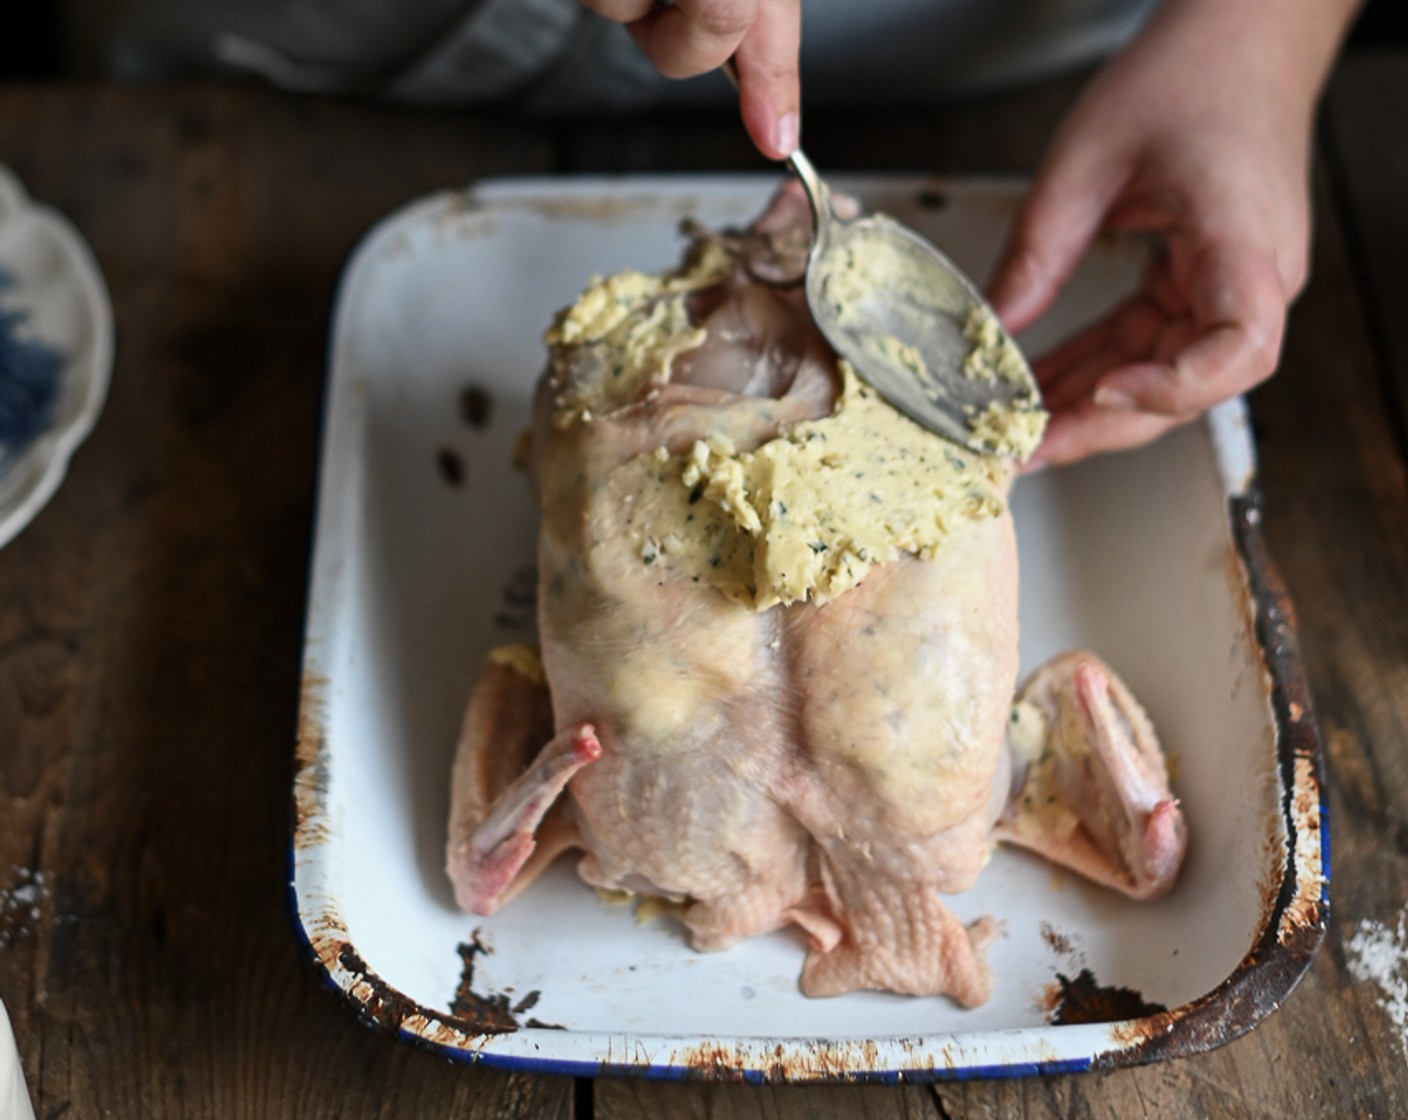 step 4 Using your fingers, rub the garlic anchovy butter all over the chicken. Use a blunt-bladed knife to loosen the skin over the breast and push the butter into the pocket as this ensures a juicy roast.